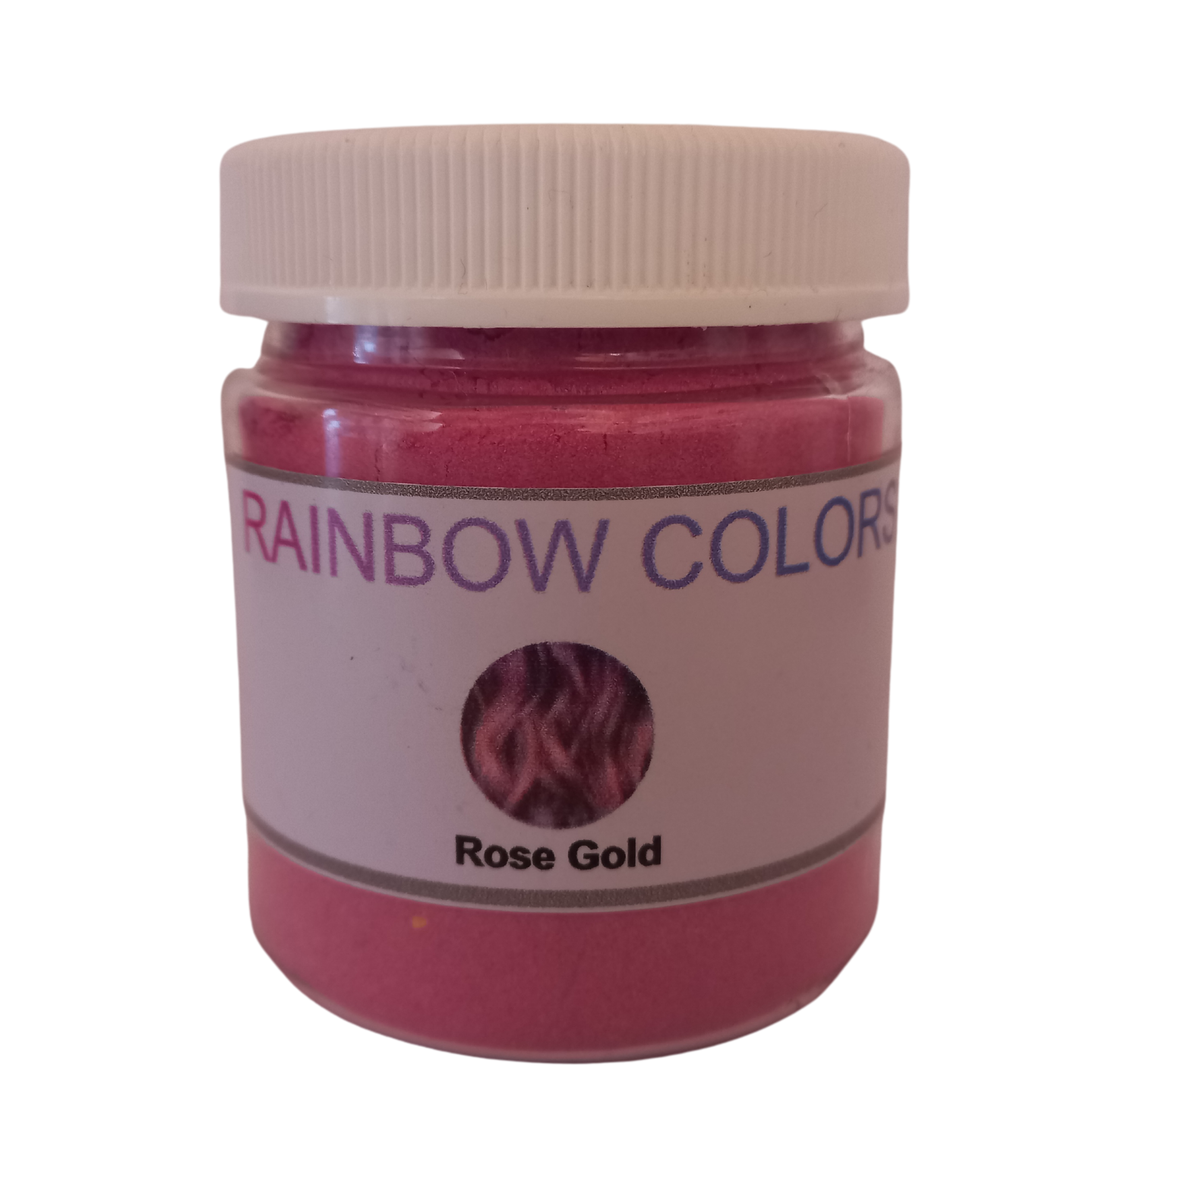 Rose Gold - Rainbow Colors Powder Hair Dye | Buy Online in South Africa |  